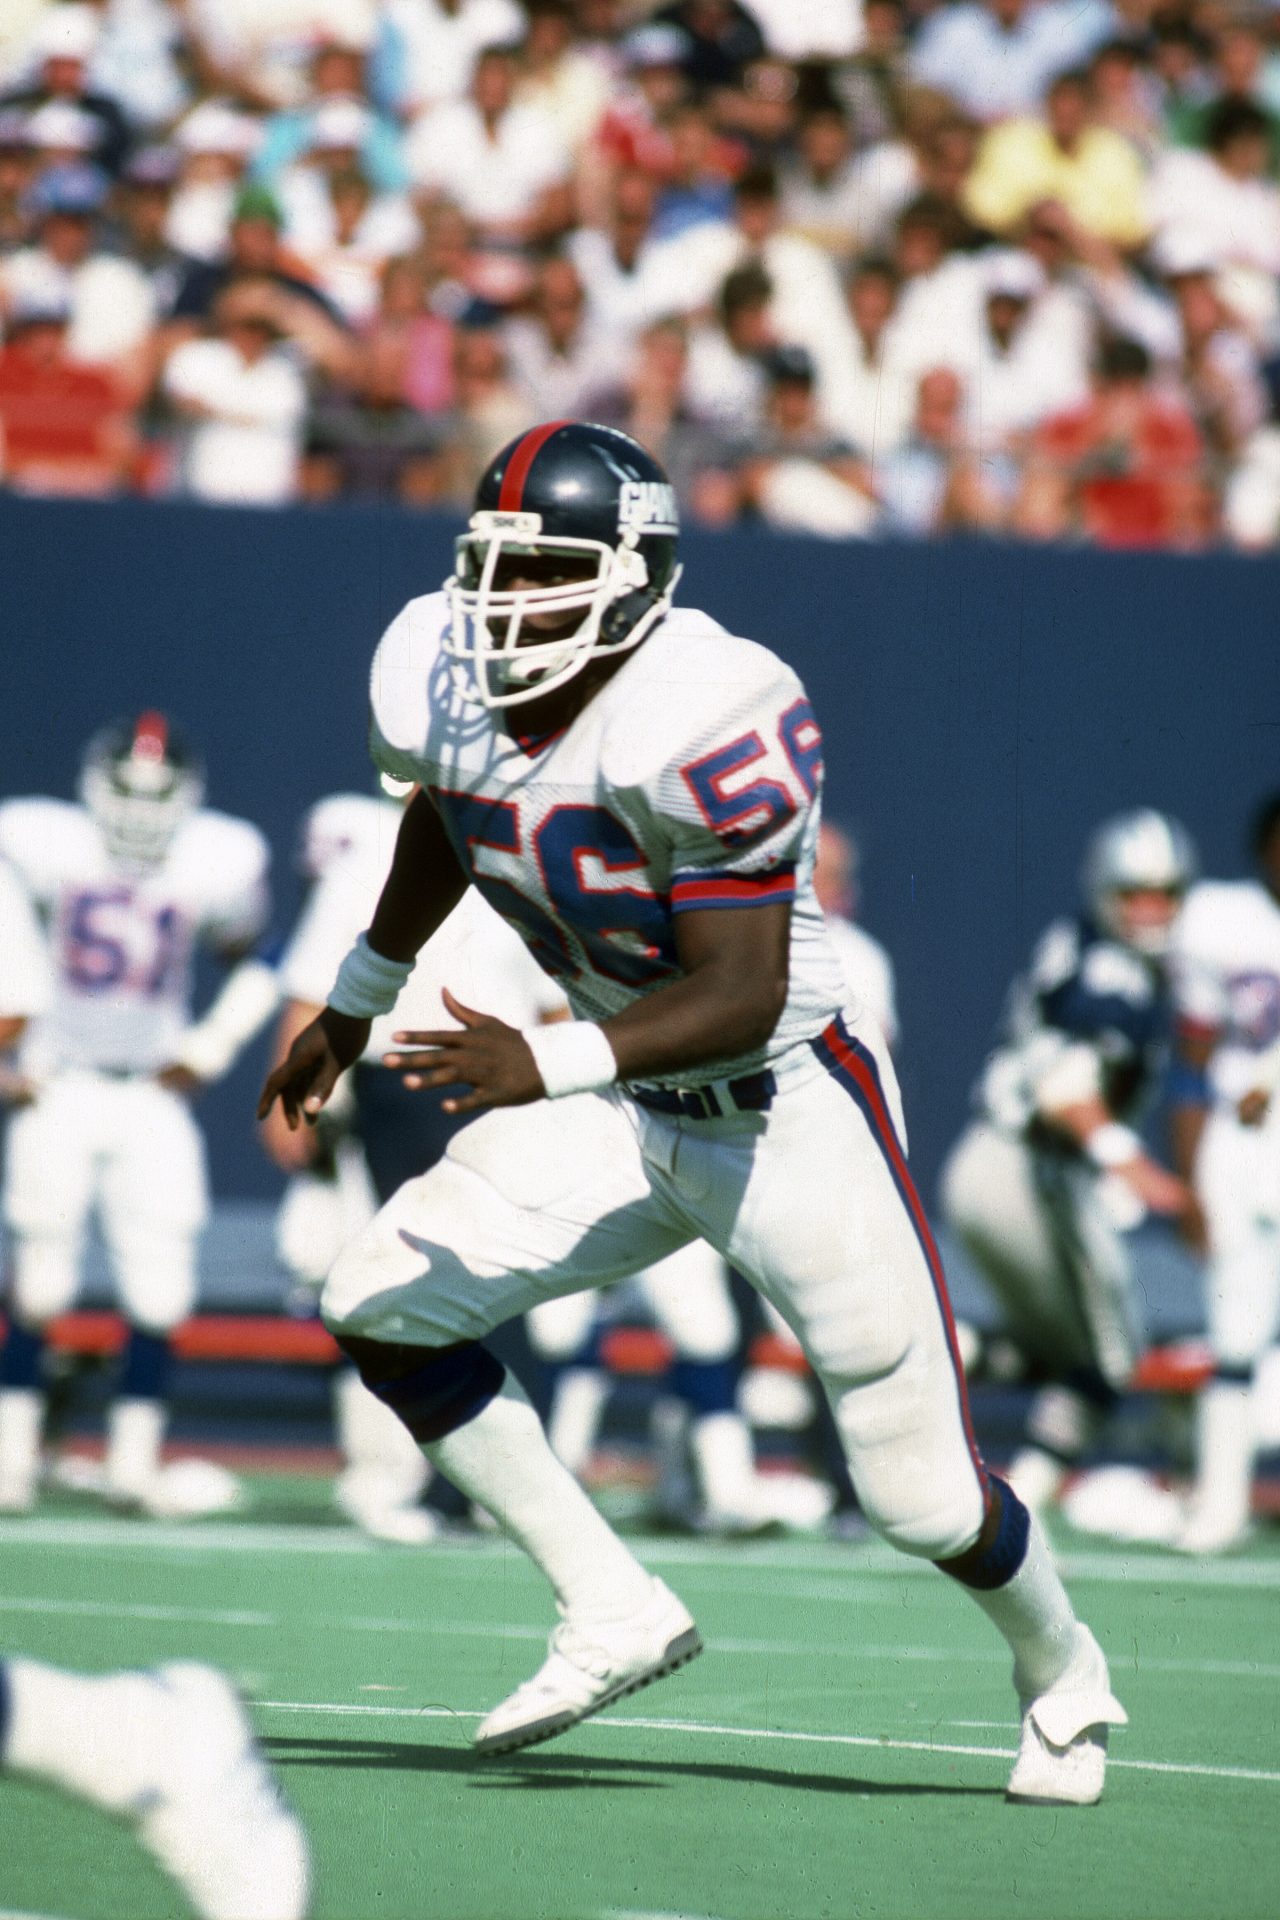 What happened to former NFL superstar Lawrence Taylor? Derailed by substance abuse and legal trouble